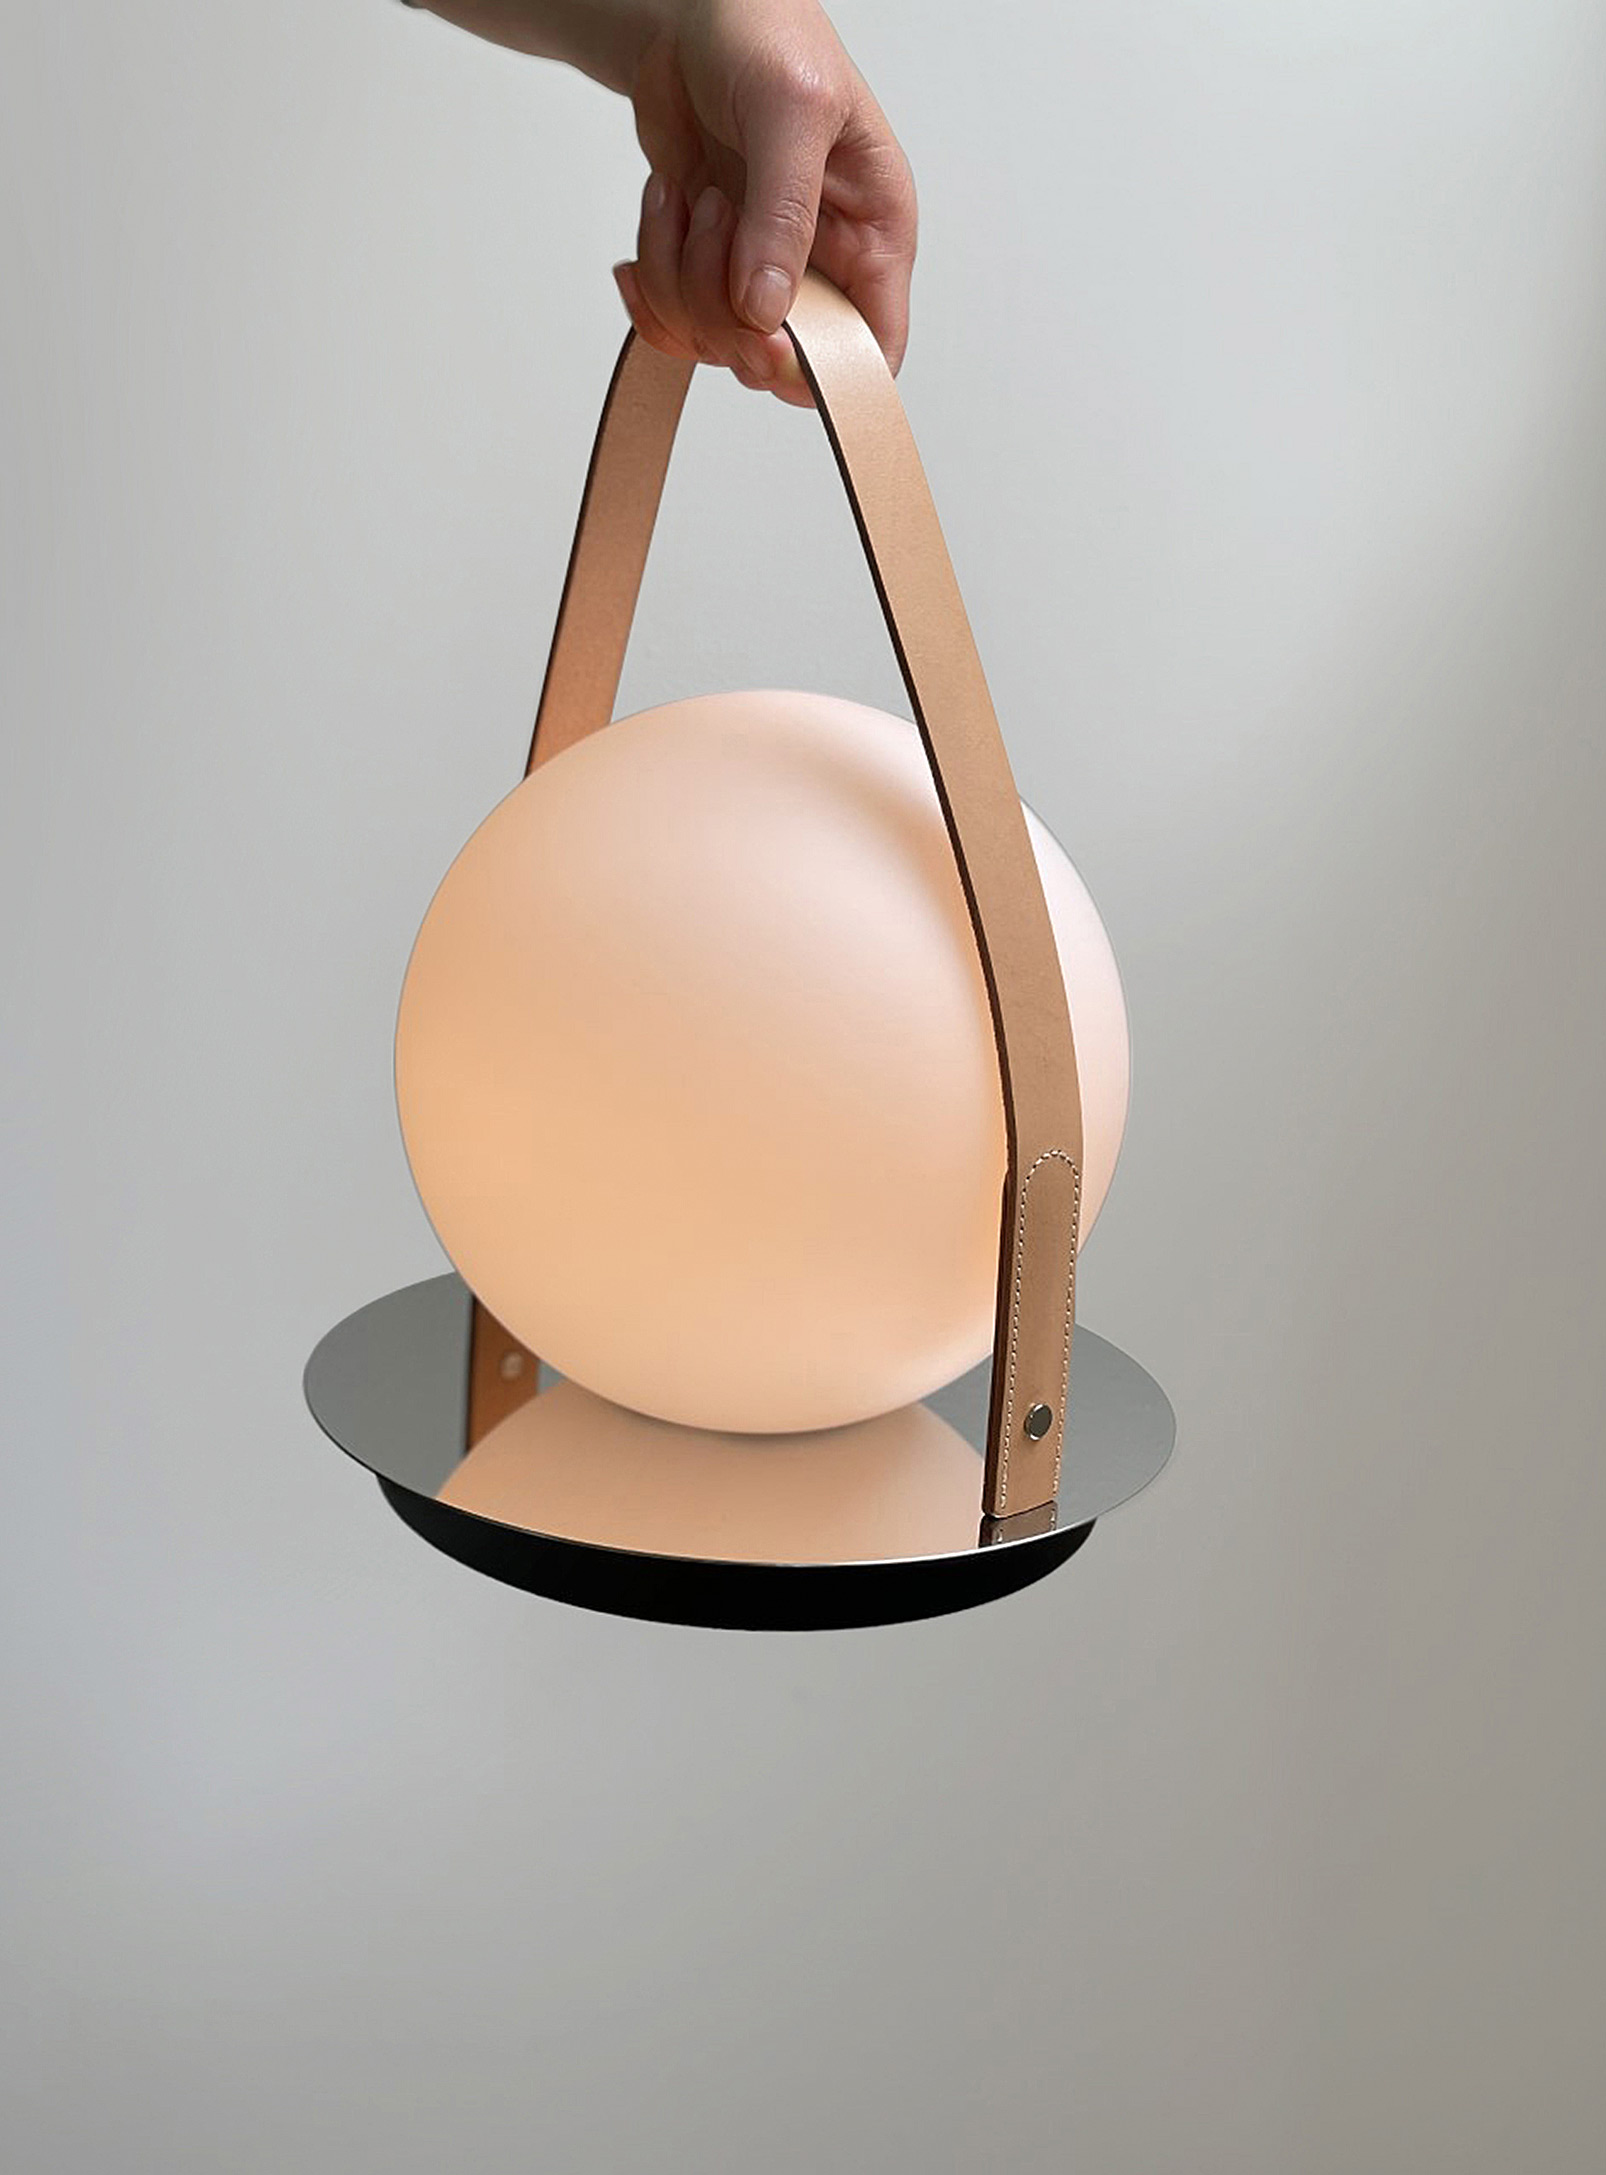 Pablo Designs Bola Portable Table Lamp In Fawn